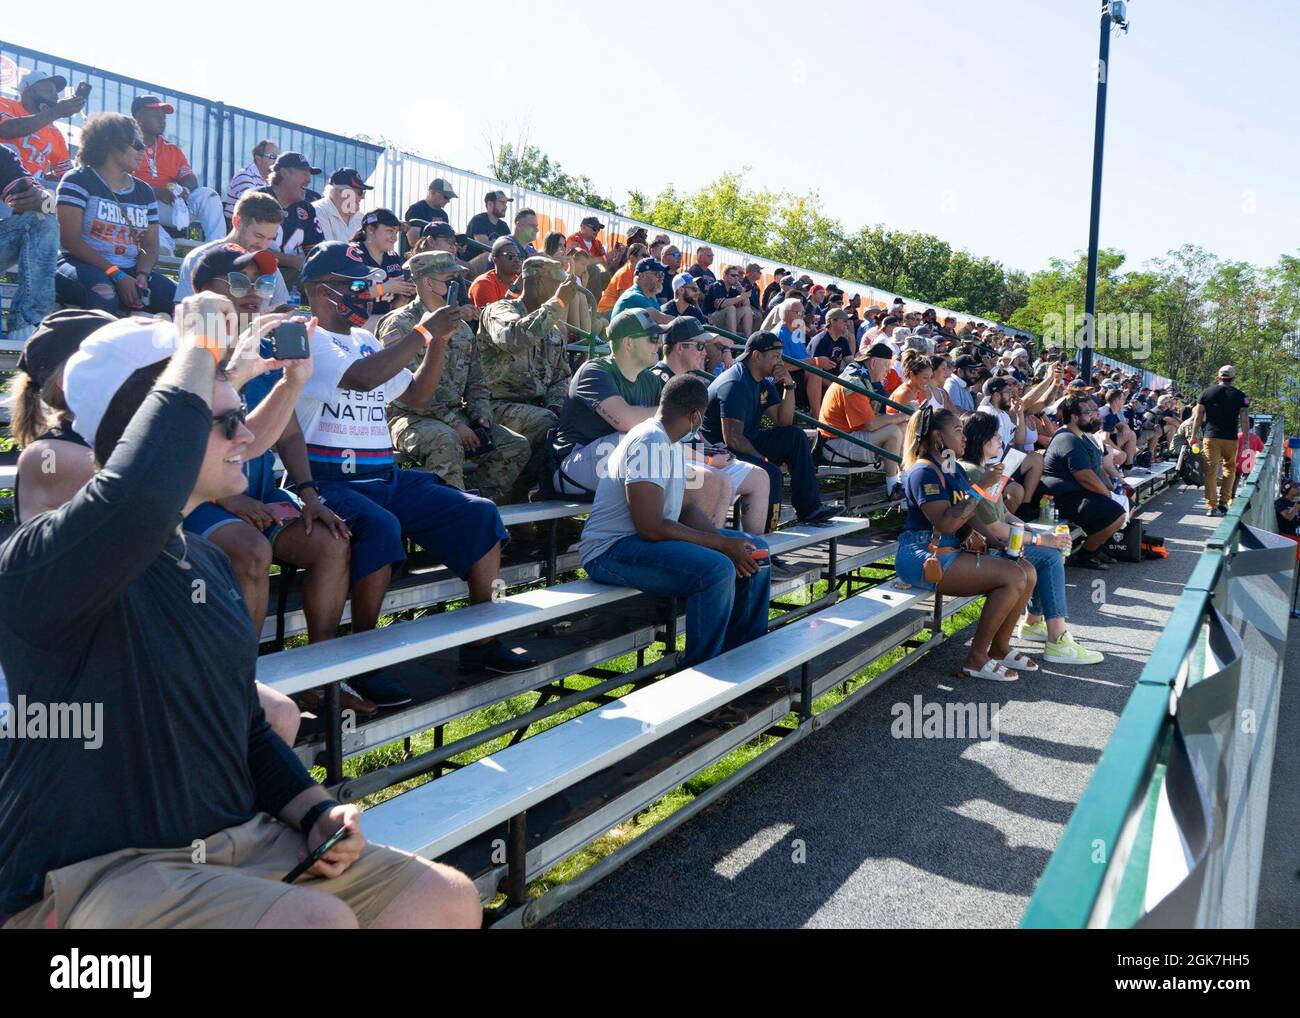 GREAT LAKES, Il. (Aug. 26, 2021) Service members and veterans across various military branches observe the open practice during the Chicago Bears Military Day. Guests were invited to watch a practice and participate in a number of fun activities at Halas Hall, the Bears training facility. Stock Photo